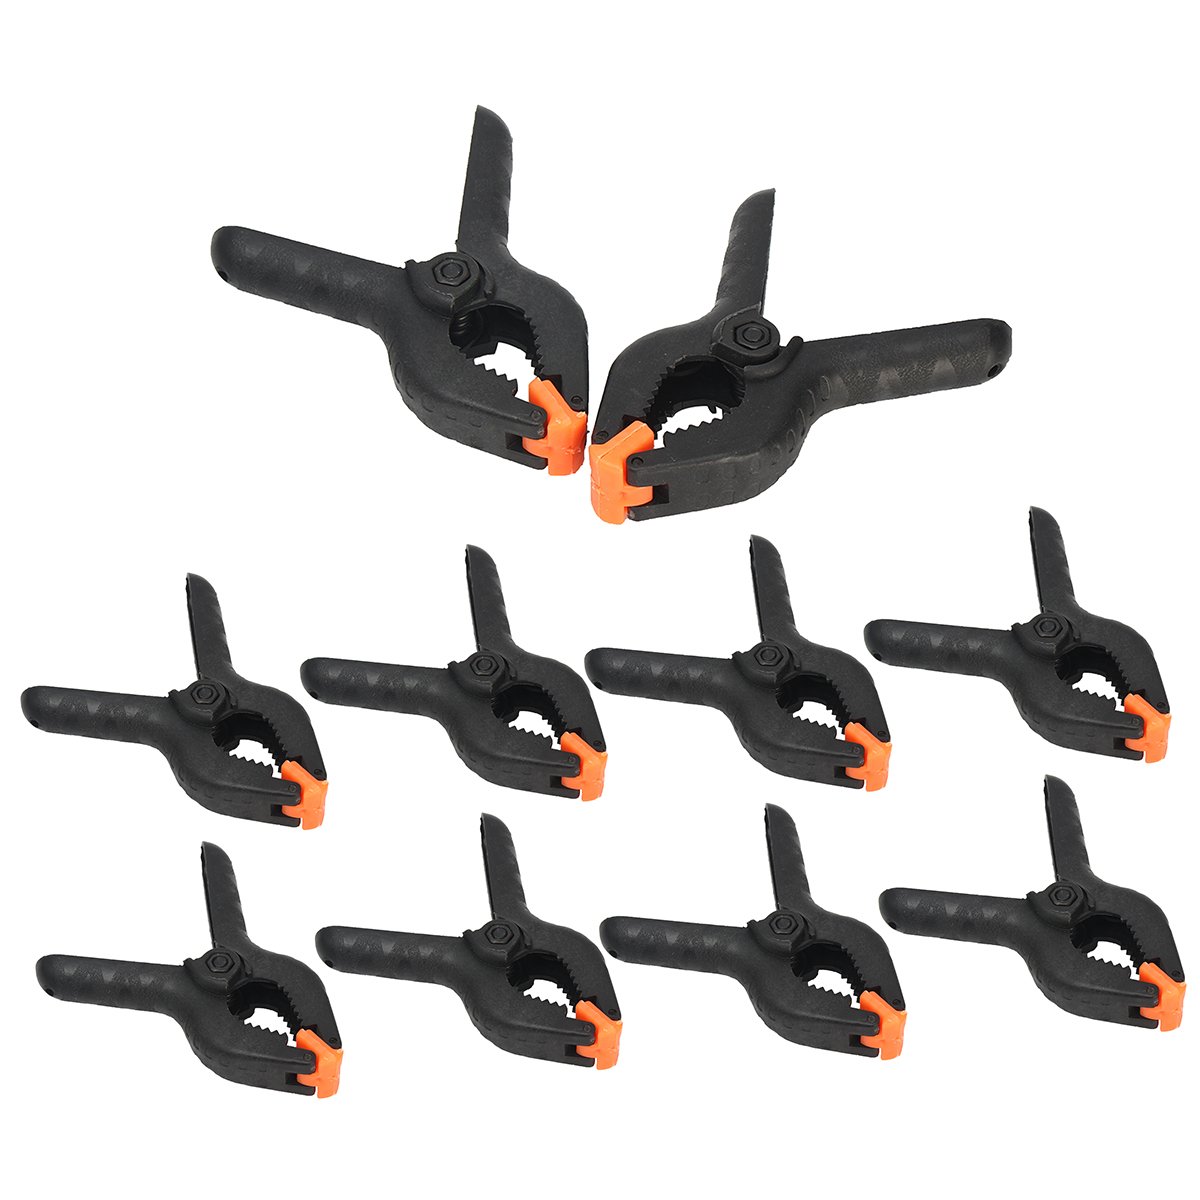 10PCS 4 inch Spring Clamps DIY Tools Plastic Nylon For Woodworking Hobbies 2